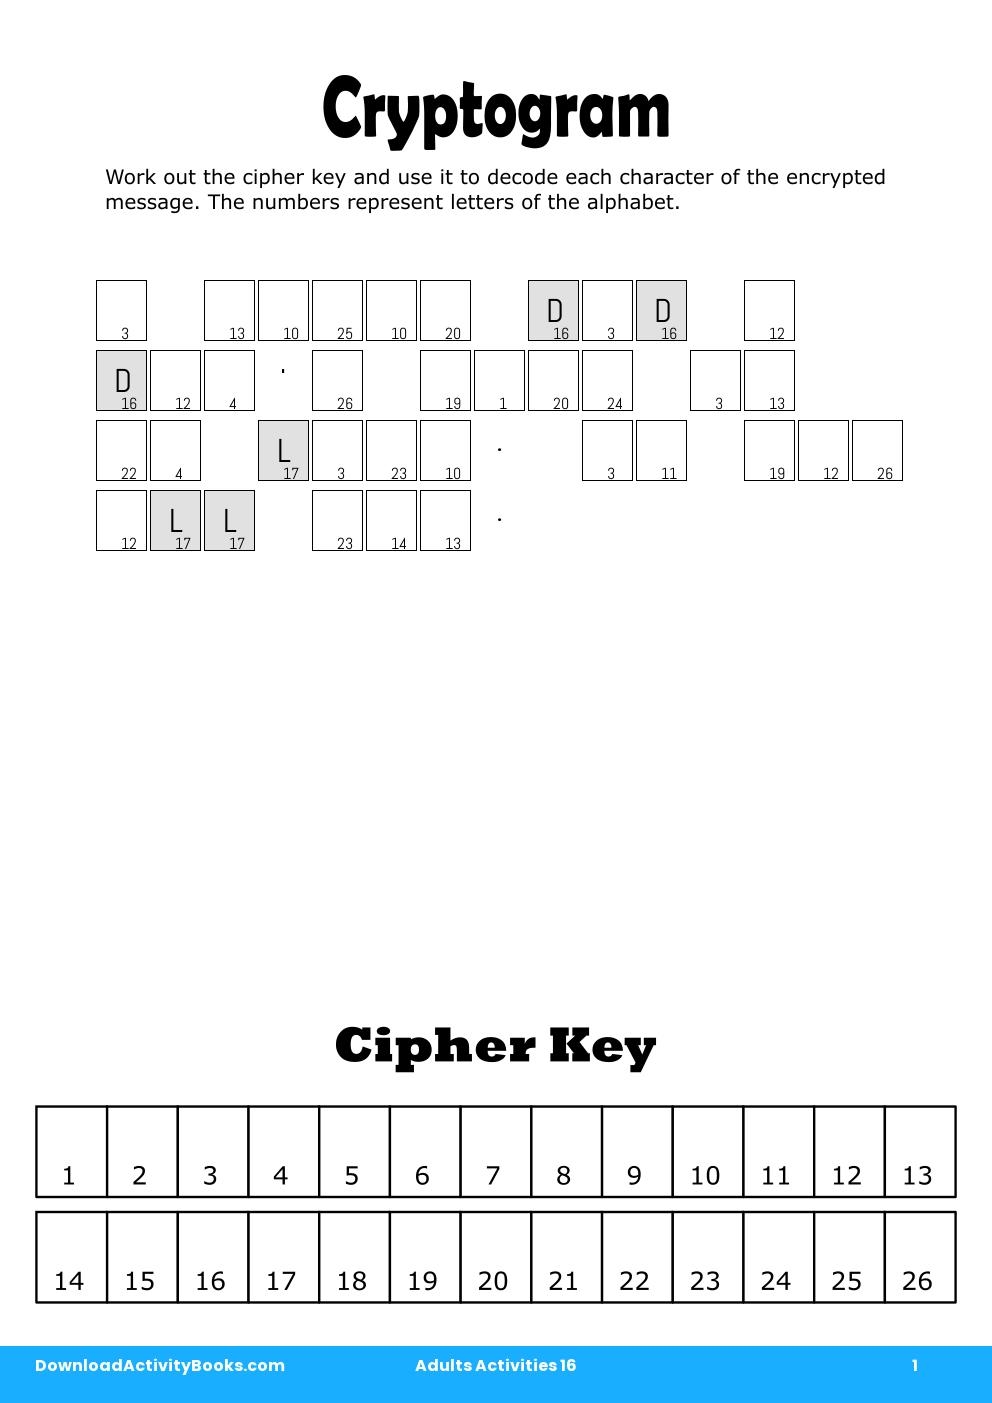 Cryptogram in Adults Activities 16